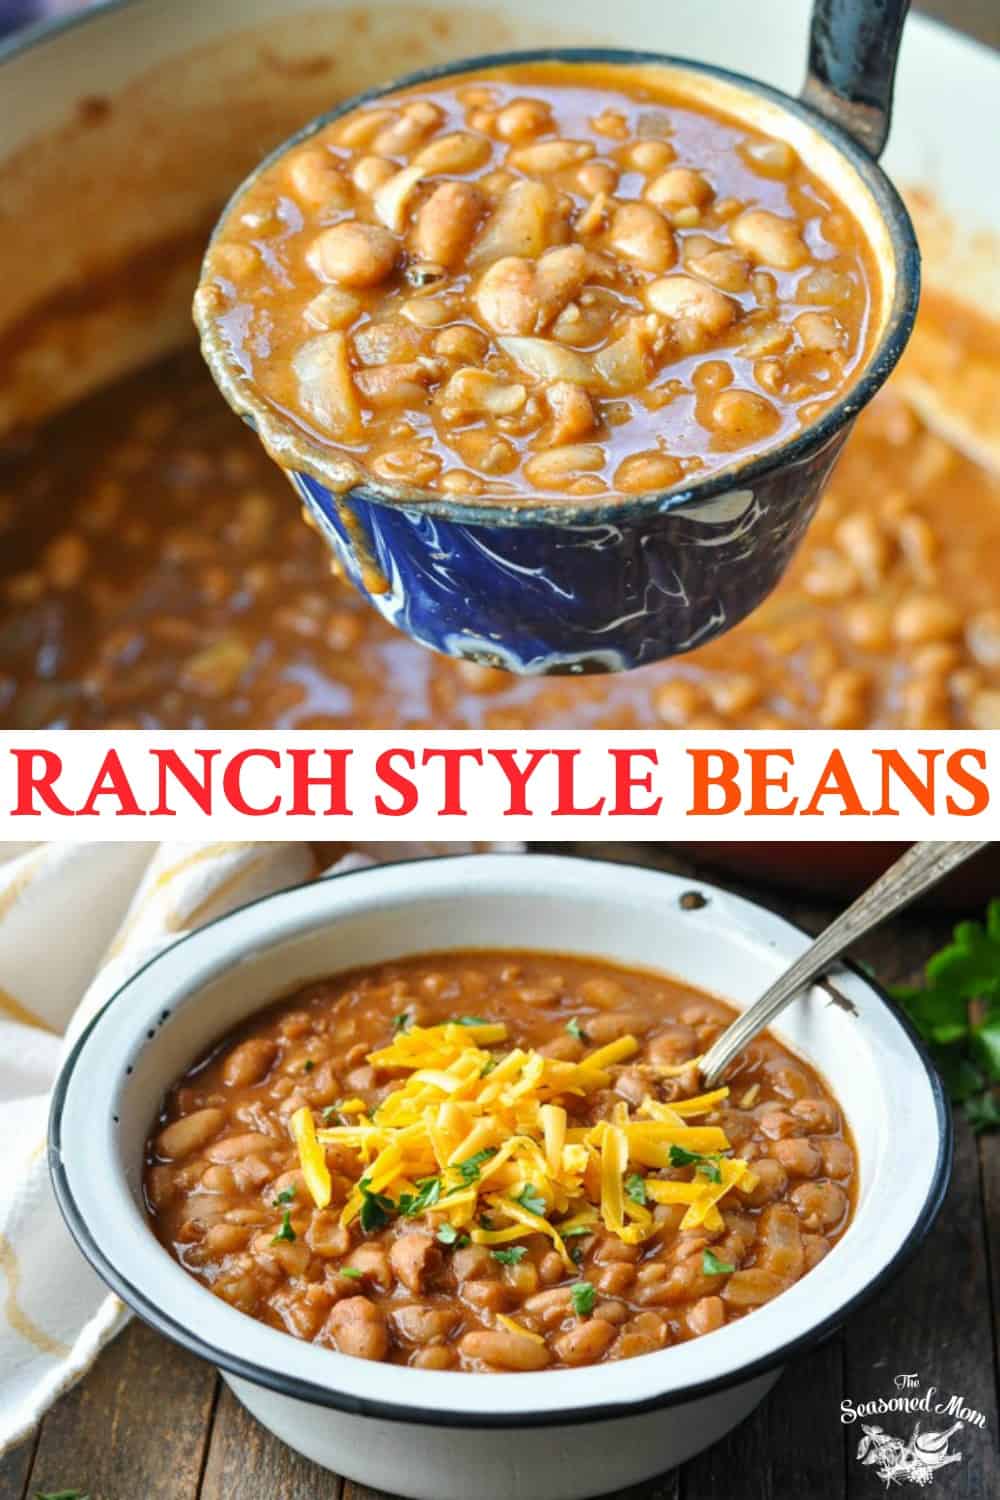 Ranch Style Beans - The Seasoned Mom